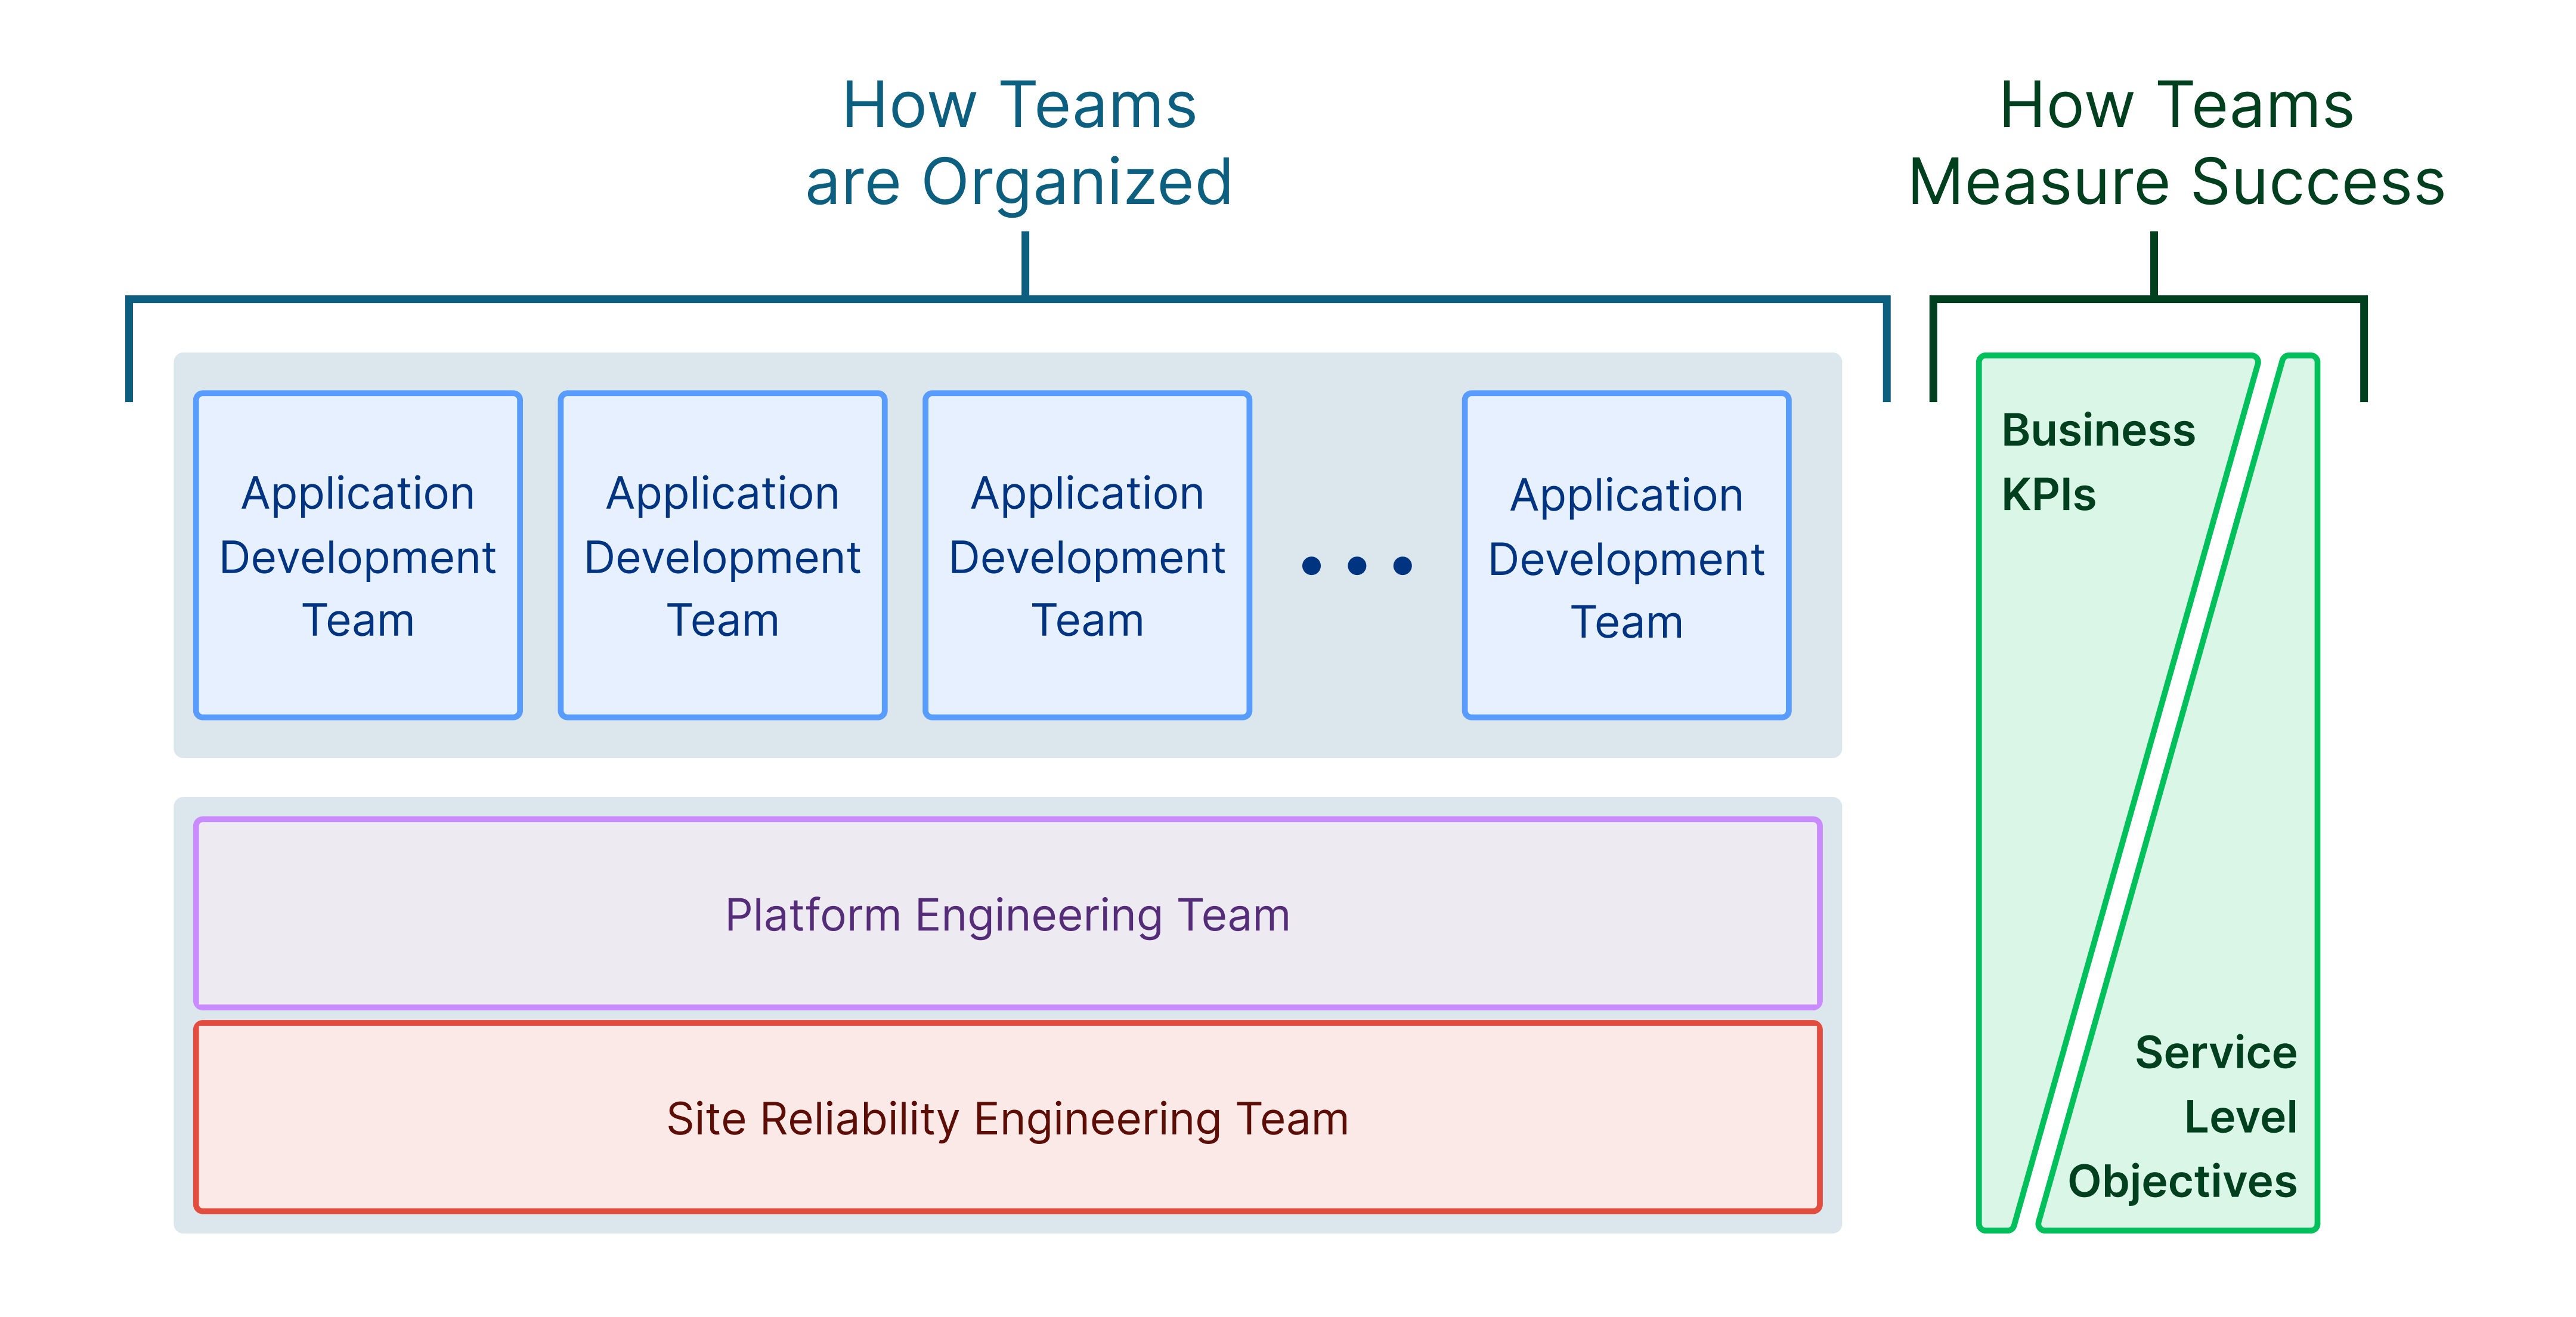 Organisation chart showing that multiple application teams are supported by both Platform Engineering and Site Reliability Engineering teams. Application teams measure success with business KPIs. Platform and SRE teams measure success with SLOs